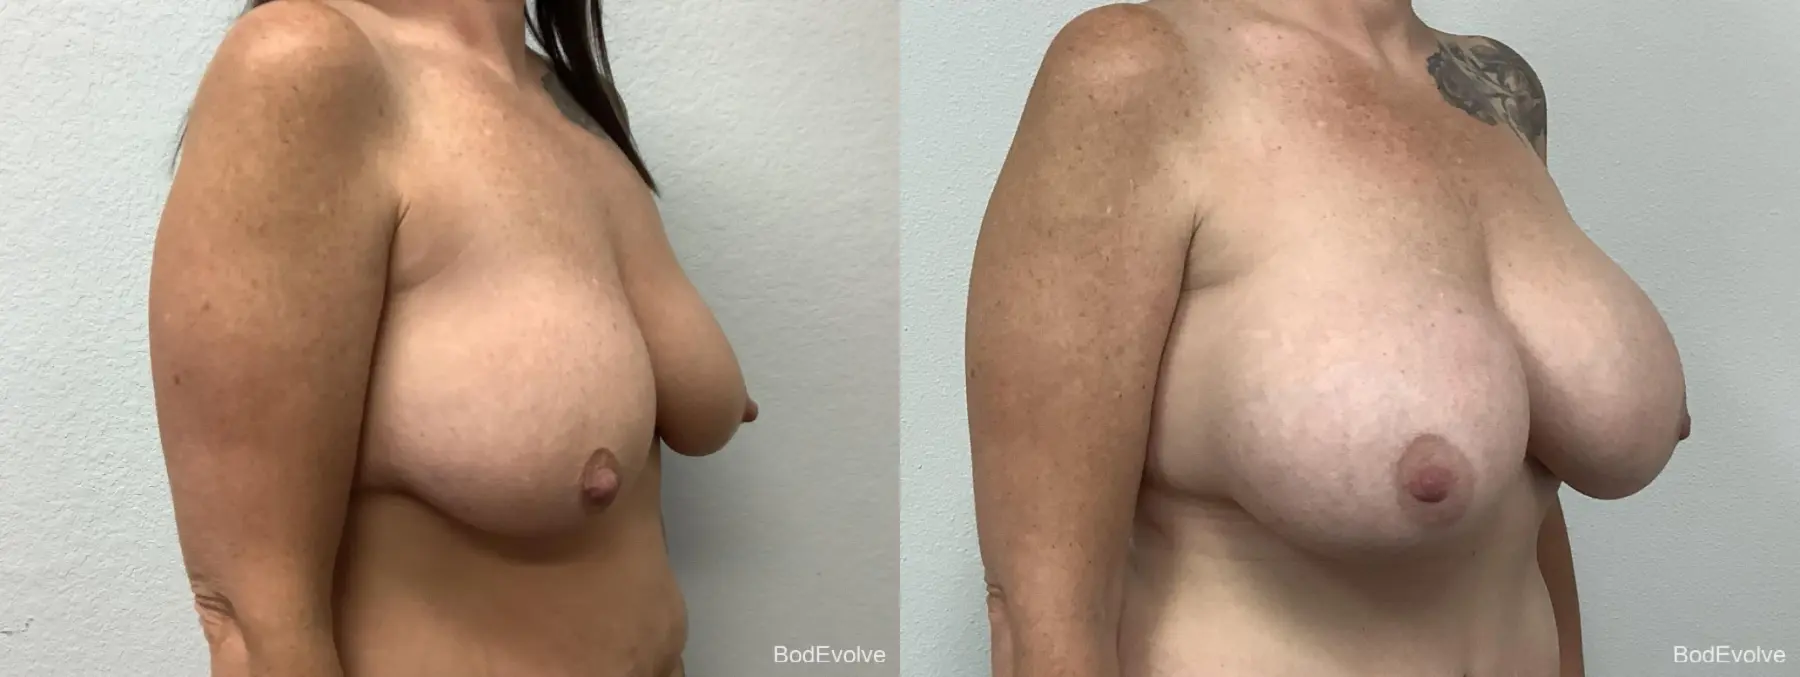 Breast Augmentation: Patient 4 - Before and After 4